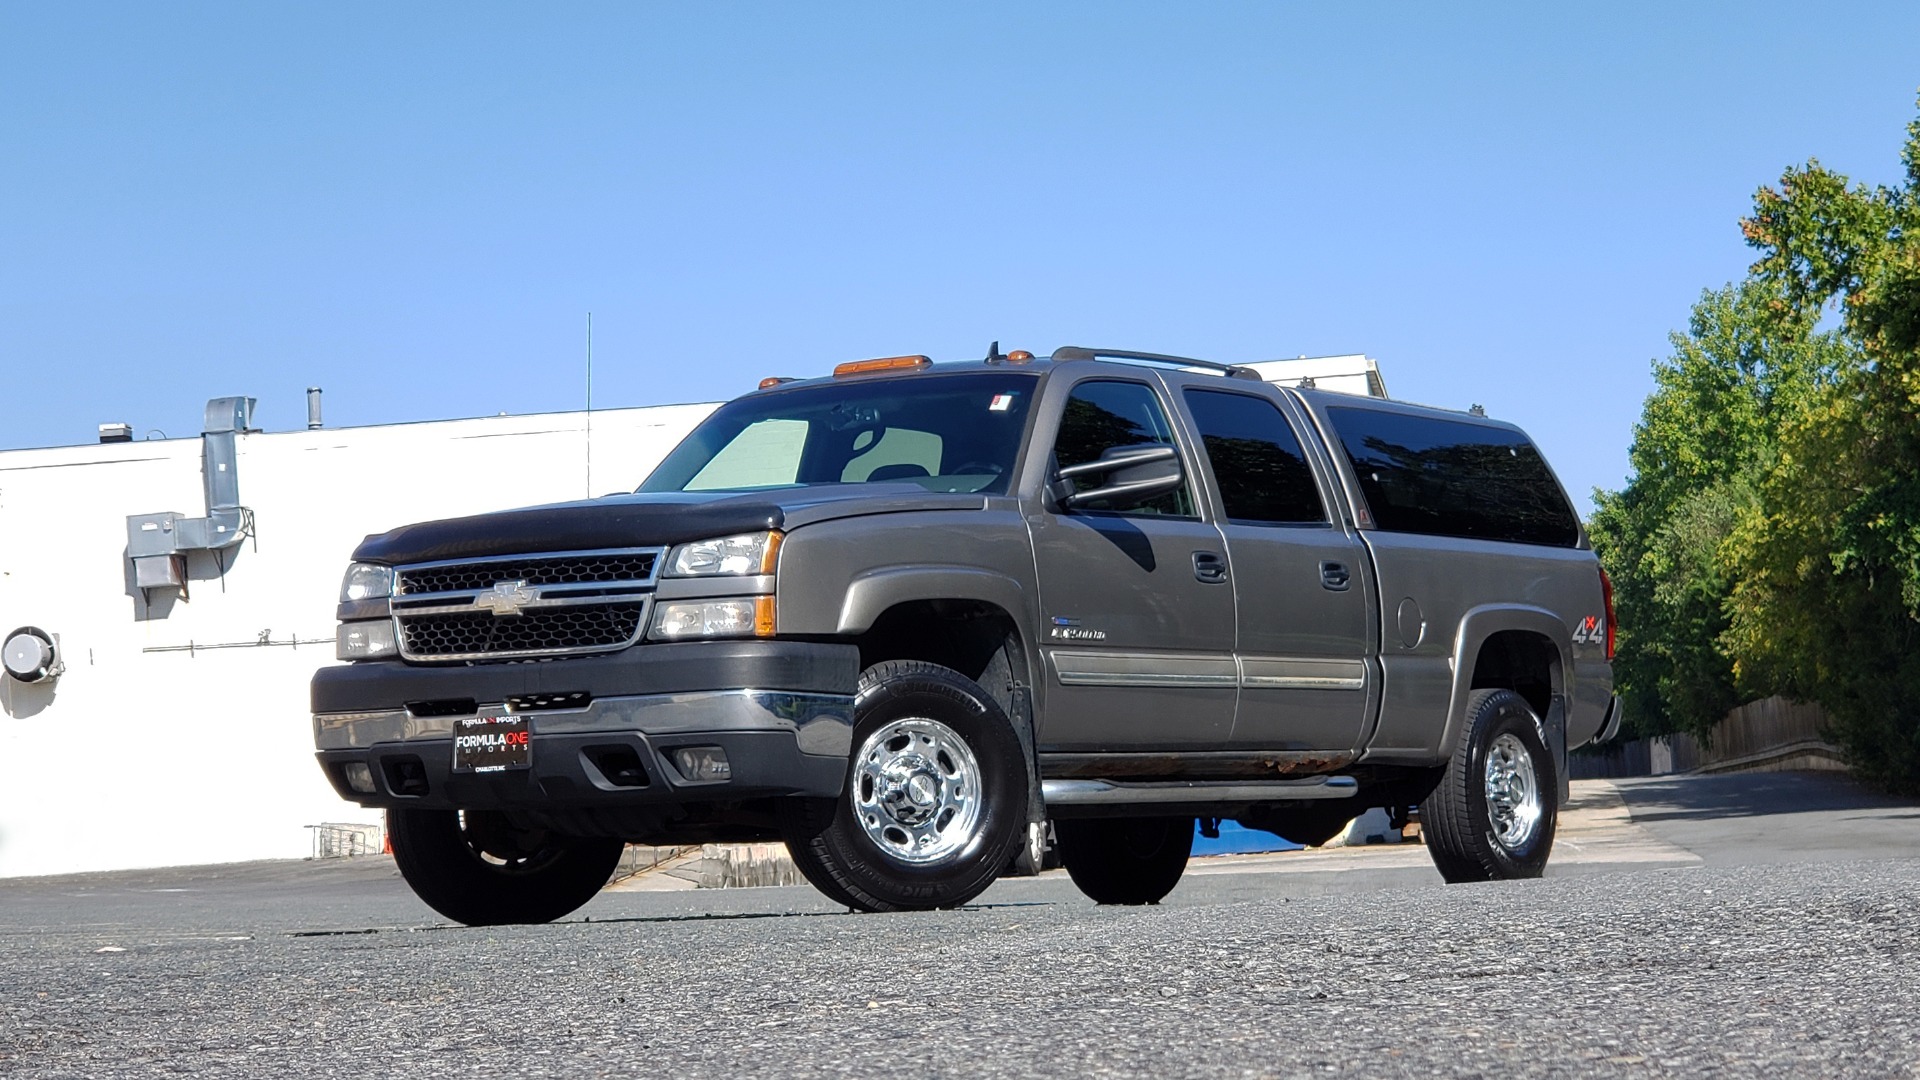 Used 2007 Chevrolet SILVERADO 2500HD CLASSIC LT3 CREWCAB / 4WD / 6.6L DURAMAX / SUNROOF / BOSE / CAMPER SHELL for sale Sold at Formula Imports in Charlotte NC 28227 1